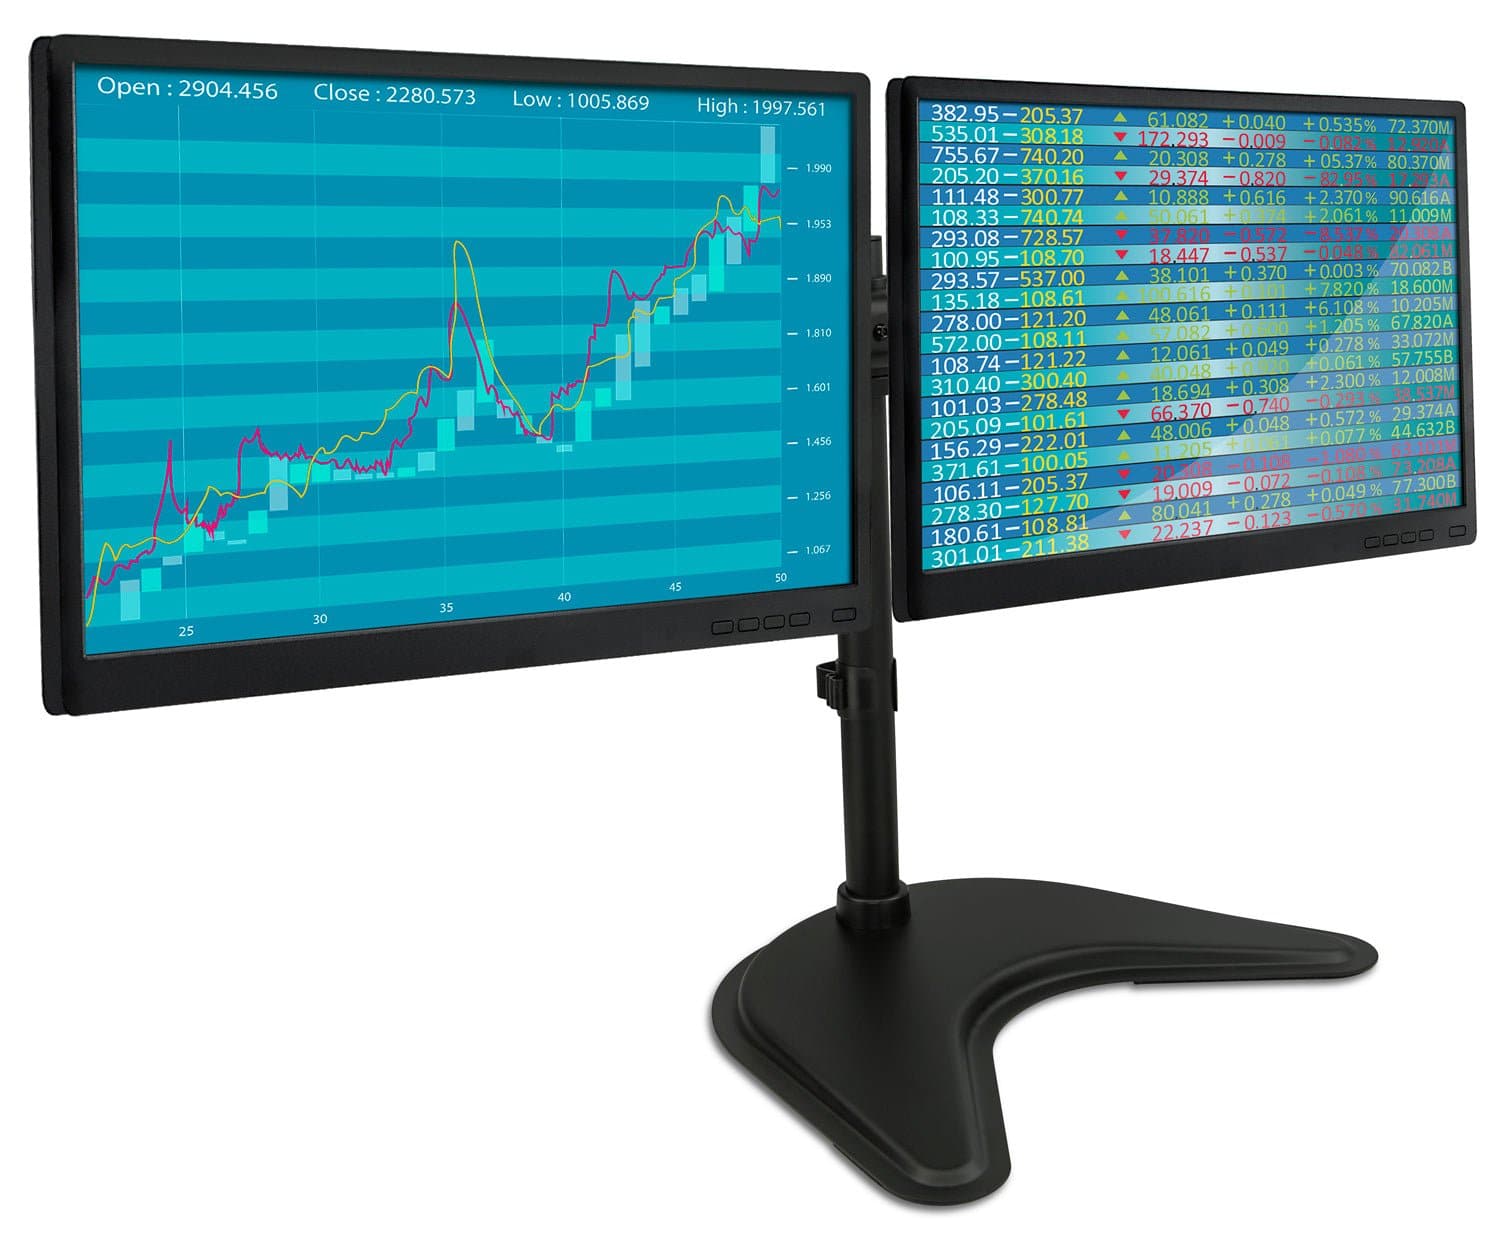 Vertical Monitor Stand - 17.19 H x 6 W x 10 D